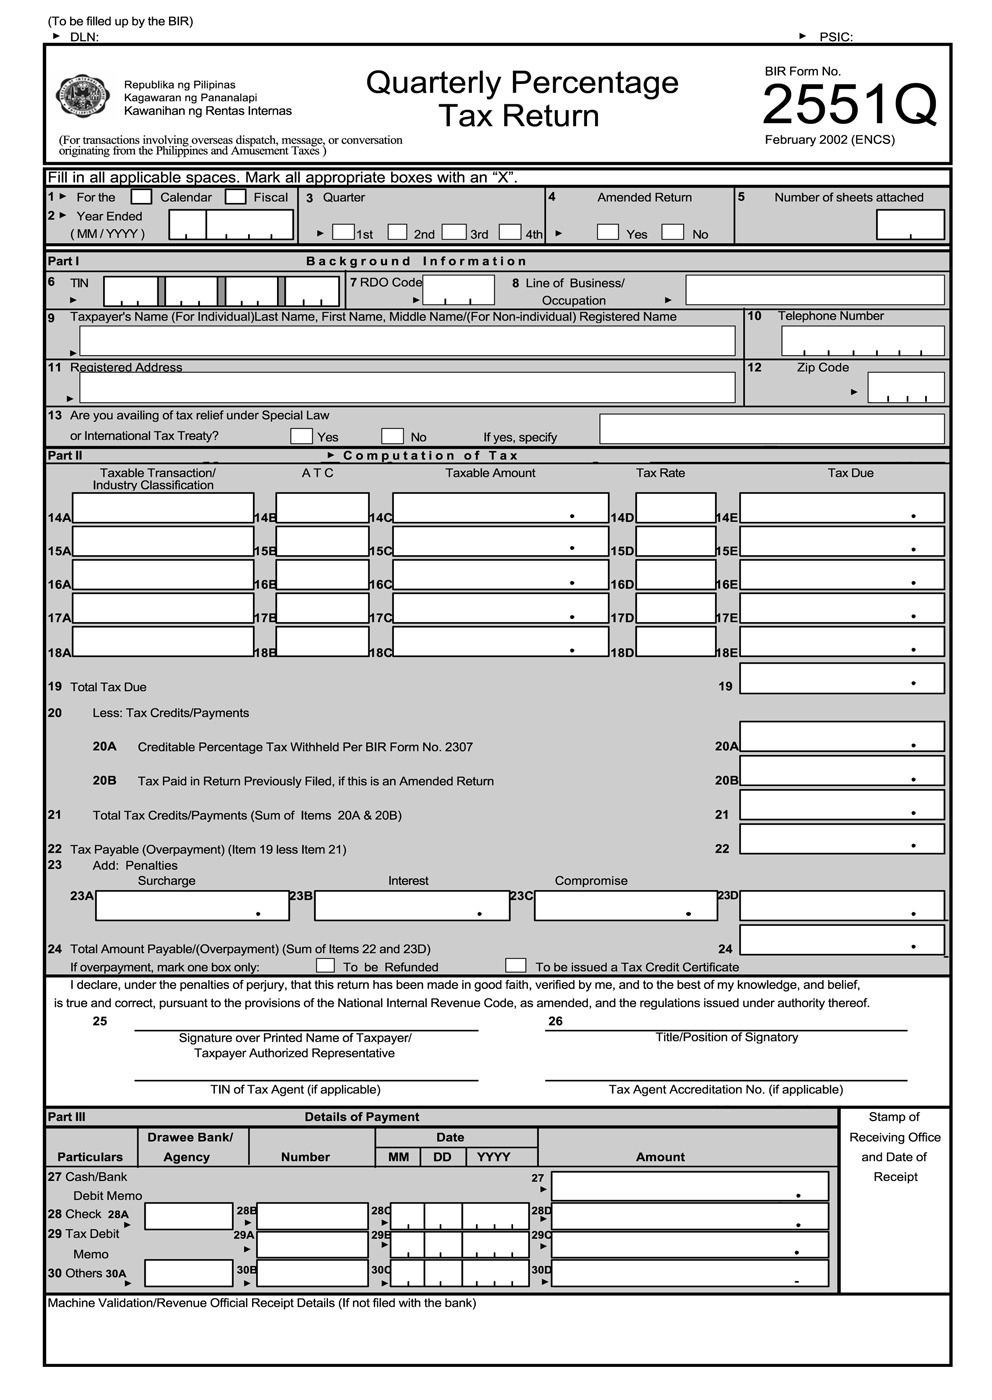 fillable-form-c-8000-single-business-tax-annual-return-1998